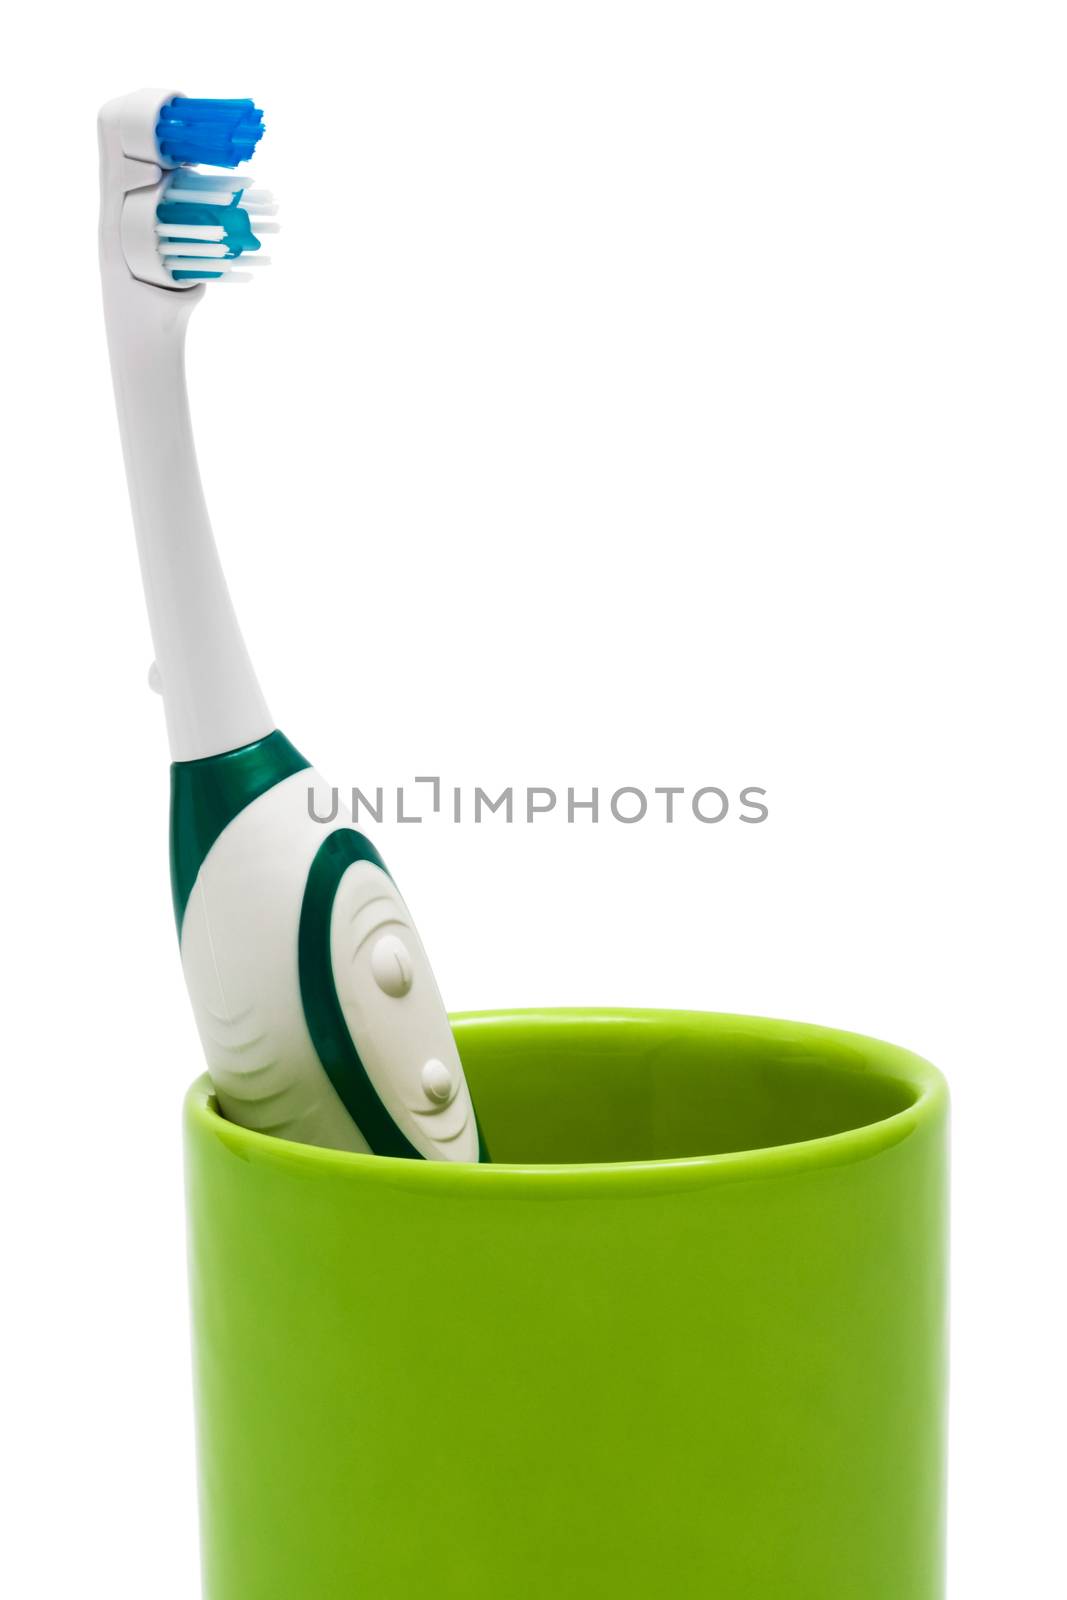 Toothbrush in a green glass by terex